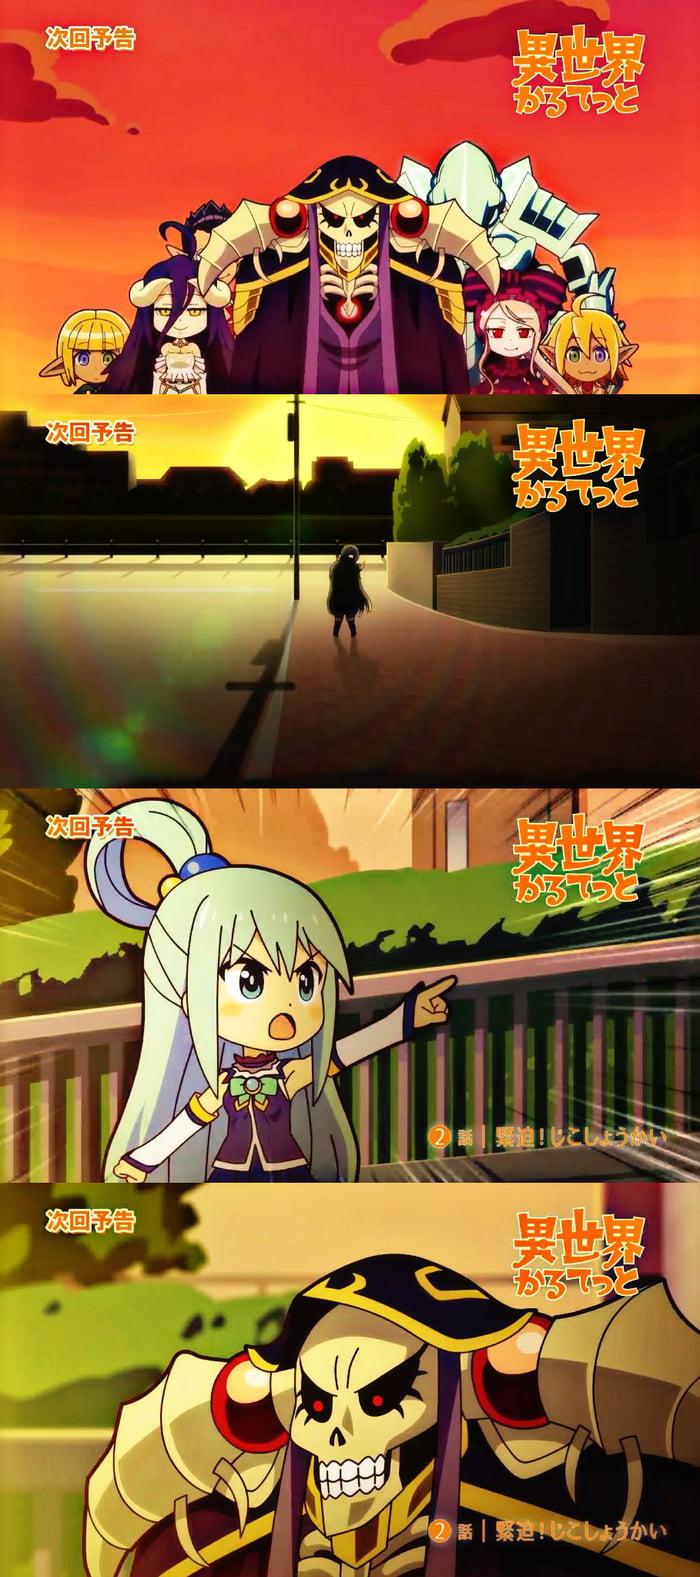 Ever since the announcement of Isekai Quartet I knew this would